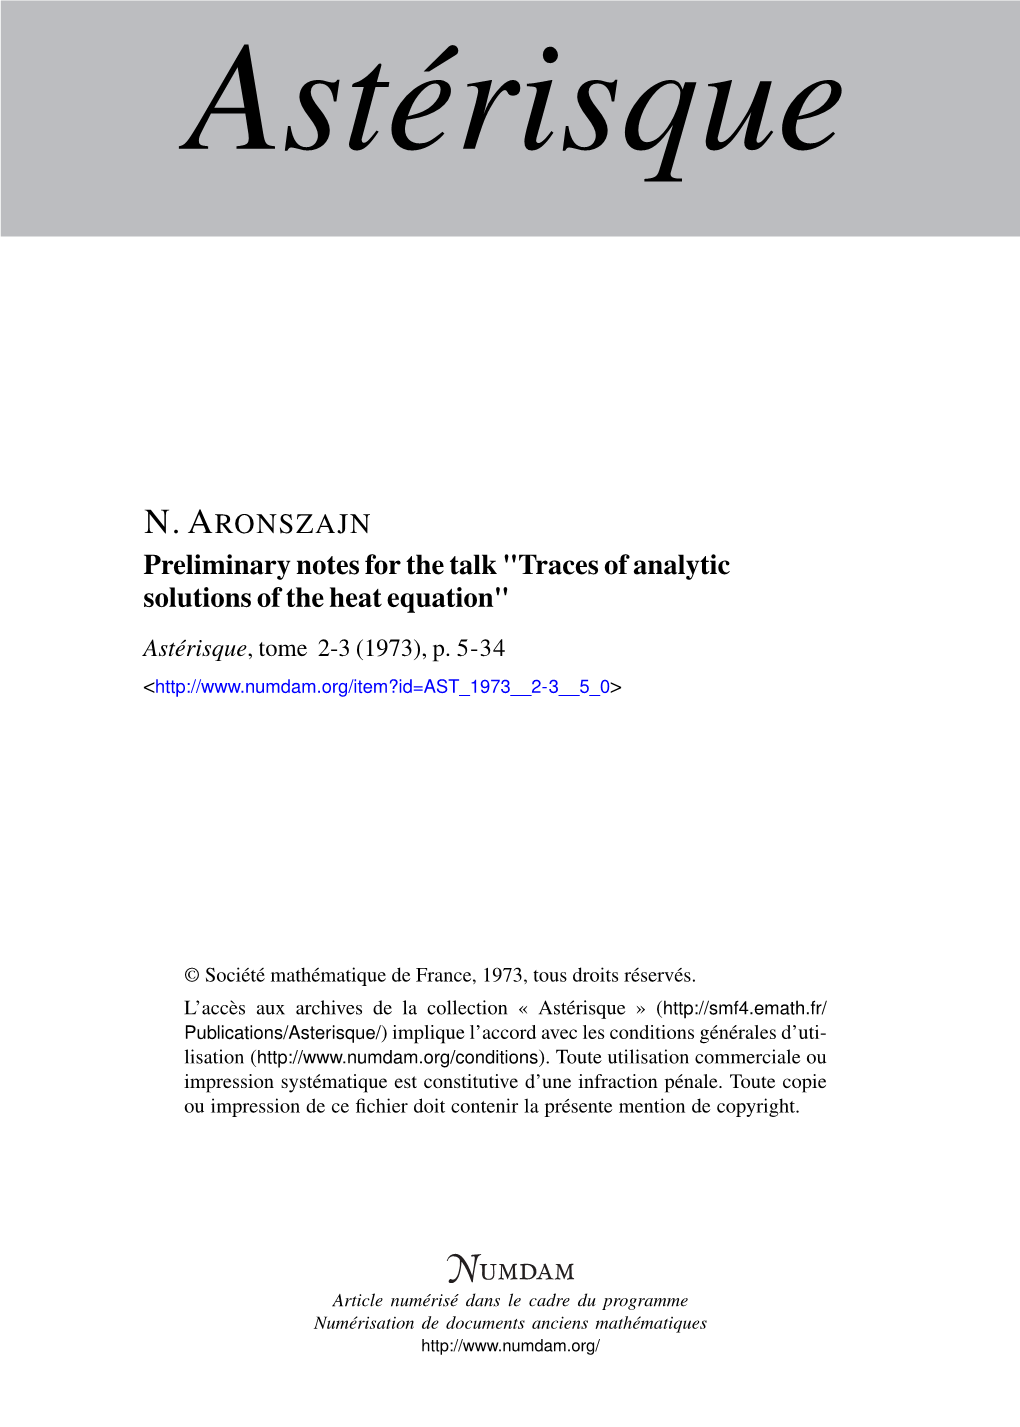 Traces of Analytic Solutions of the Heat Equation" Astérisque, Tome 2-3 (1973), P